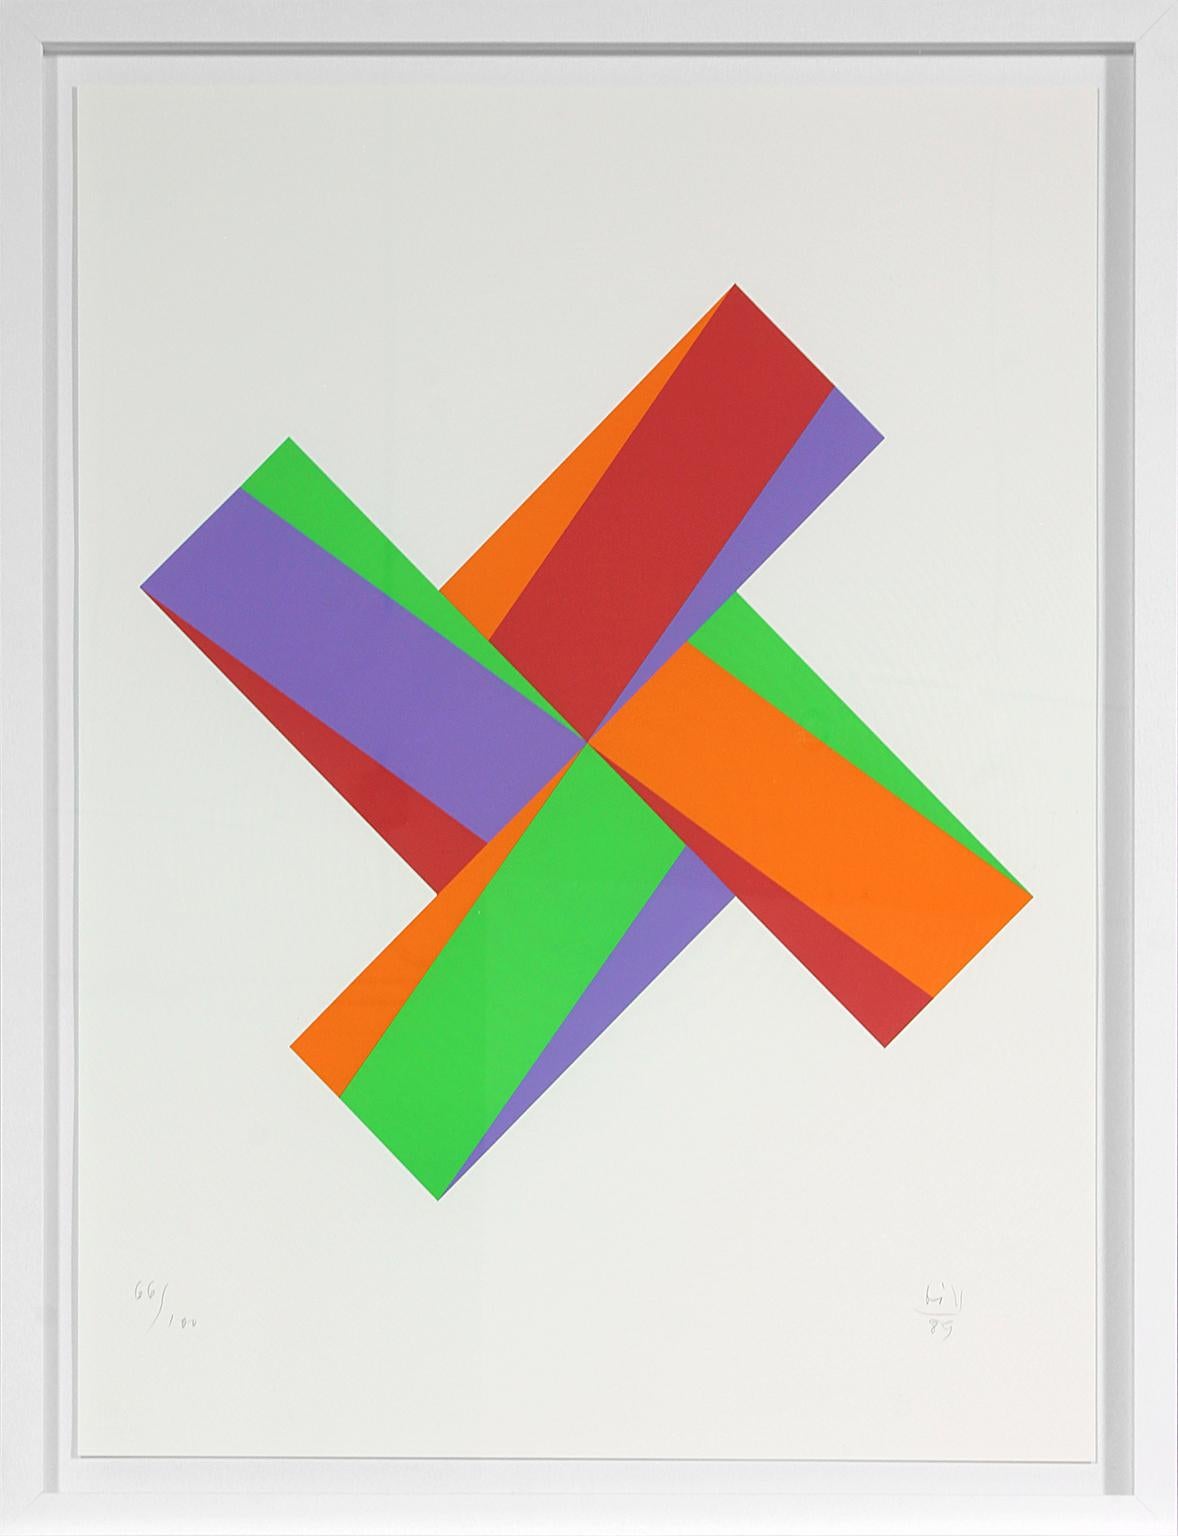 "Untitled" geometric abstract multi-color serigraph and collage by artist Max Bill from the "Kinderstern" portfolio, published in 1989 by Edition Domberger to raise money to house families of children hospitalized with cancer. Hand-numbered 66/100